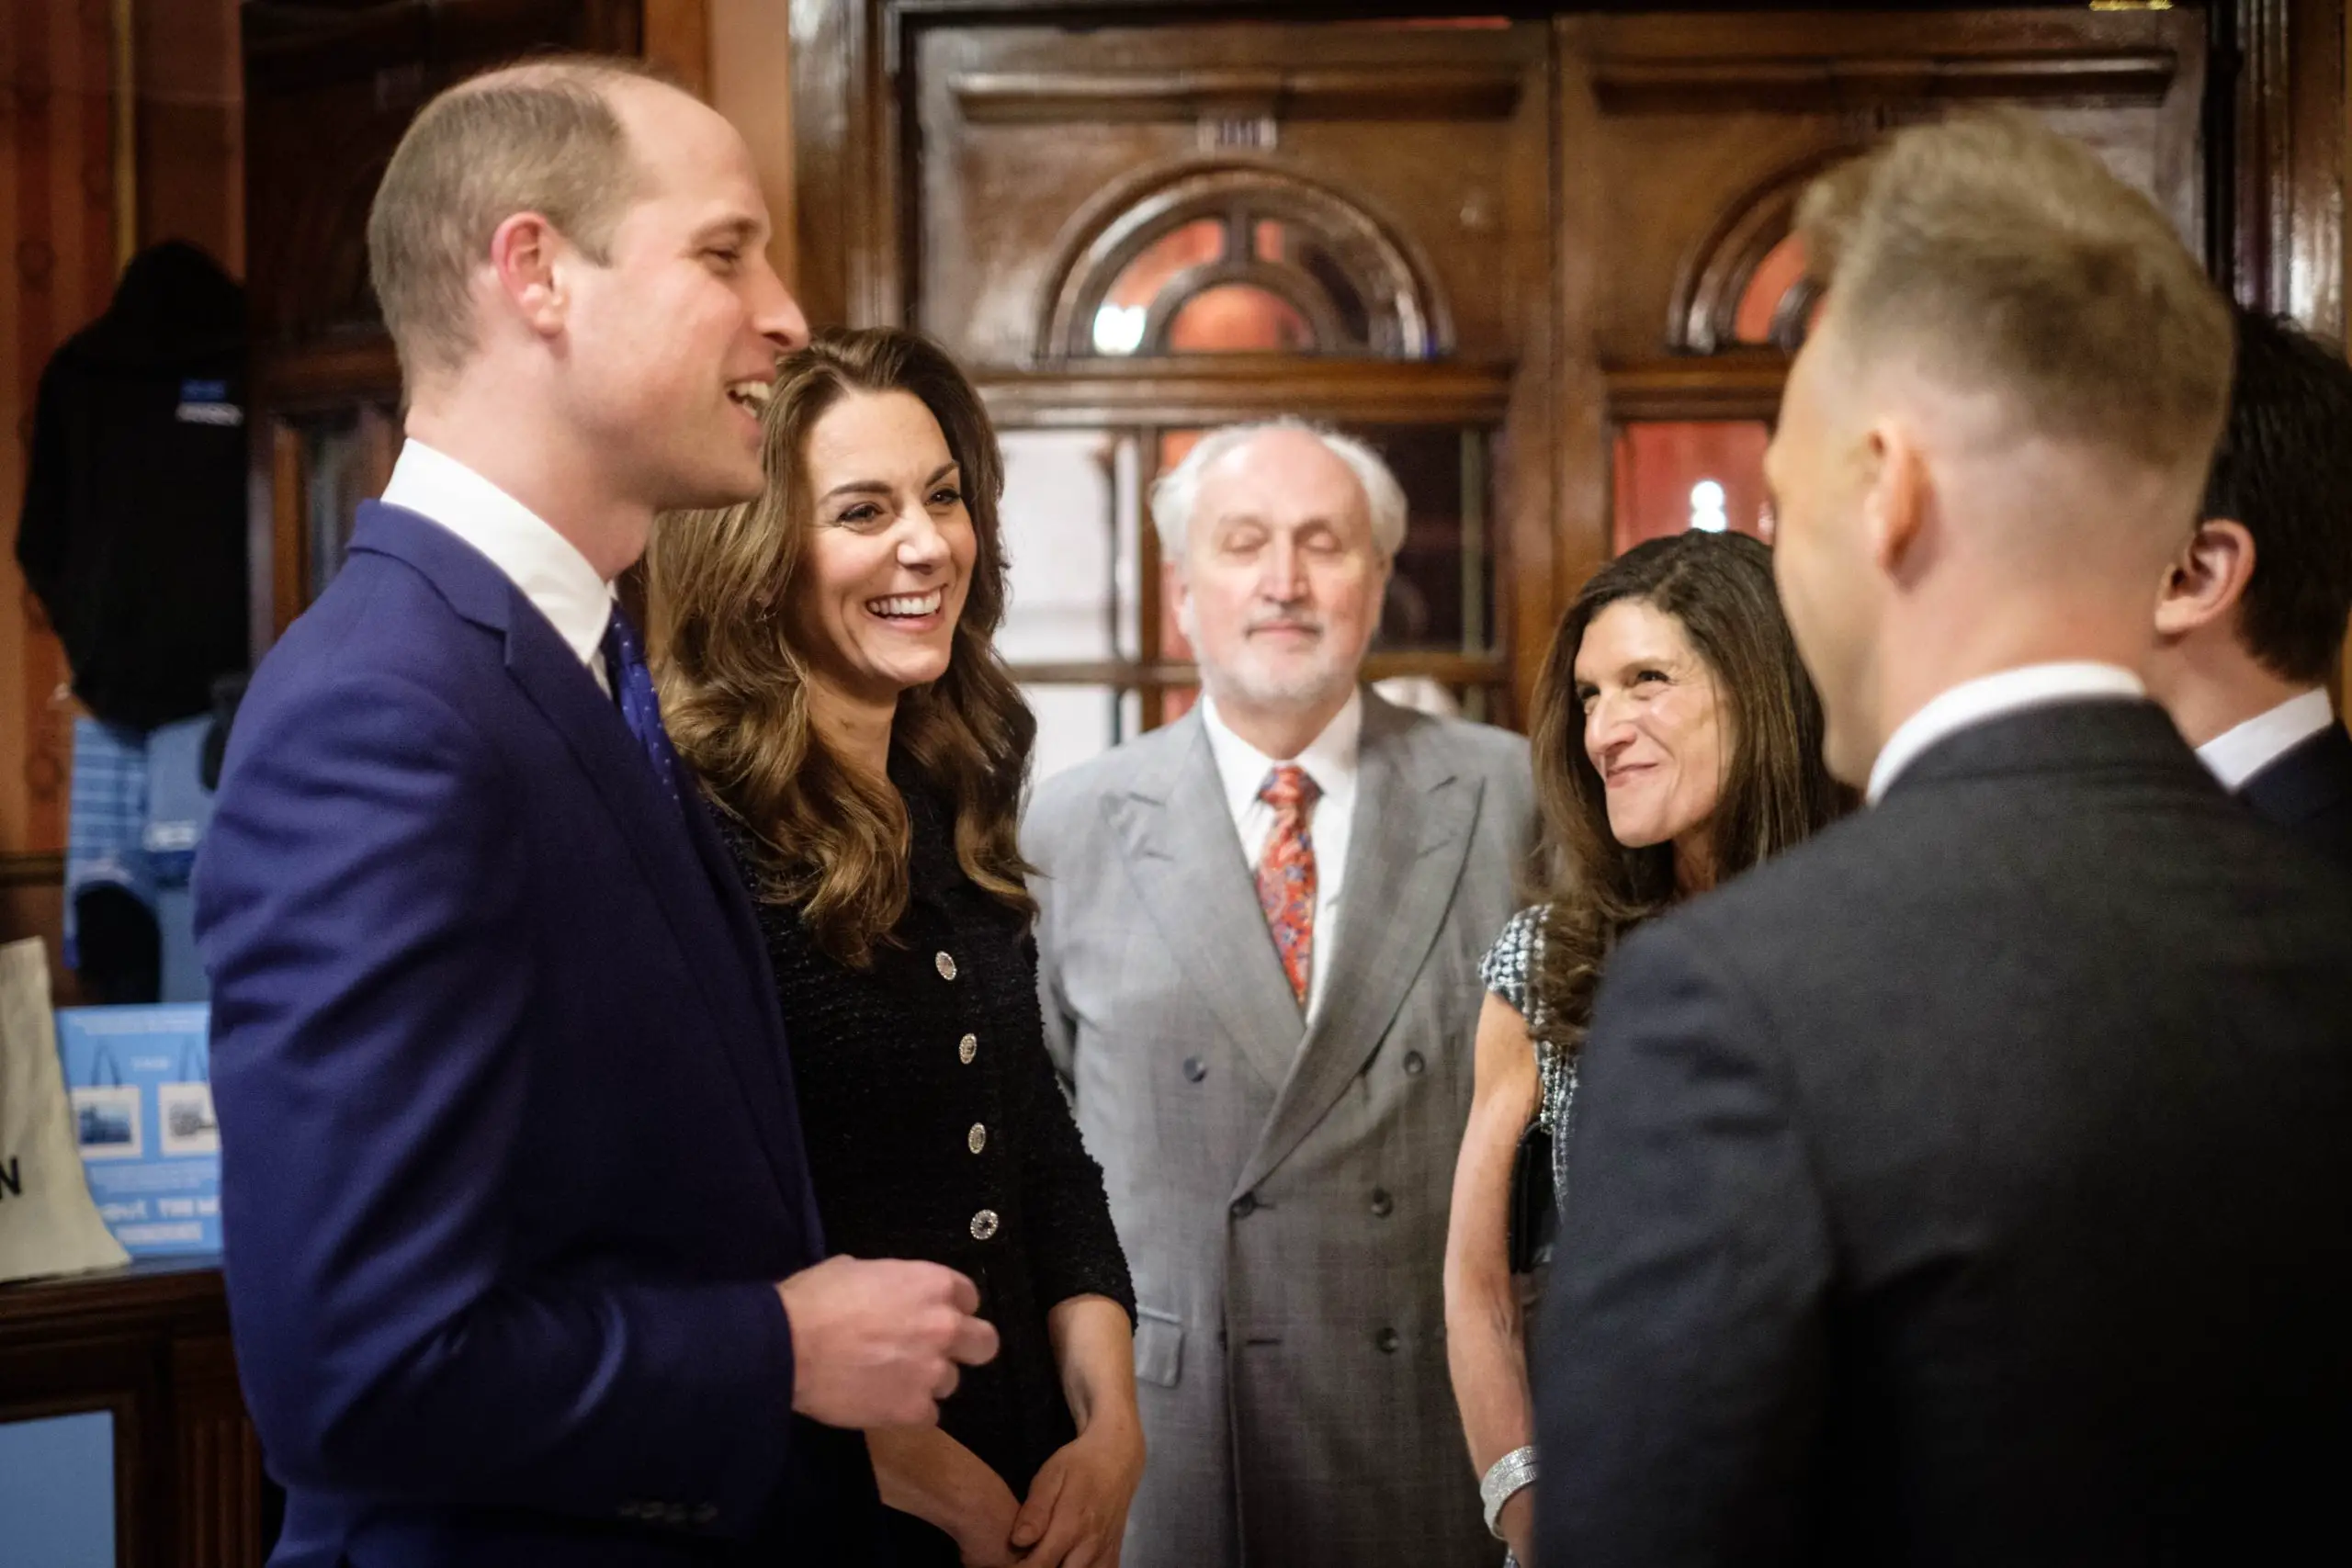 The Duke and Duchess of Cambridge met with the cast of Dear Evan Hansen' at the Noël Coward Theatre